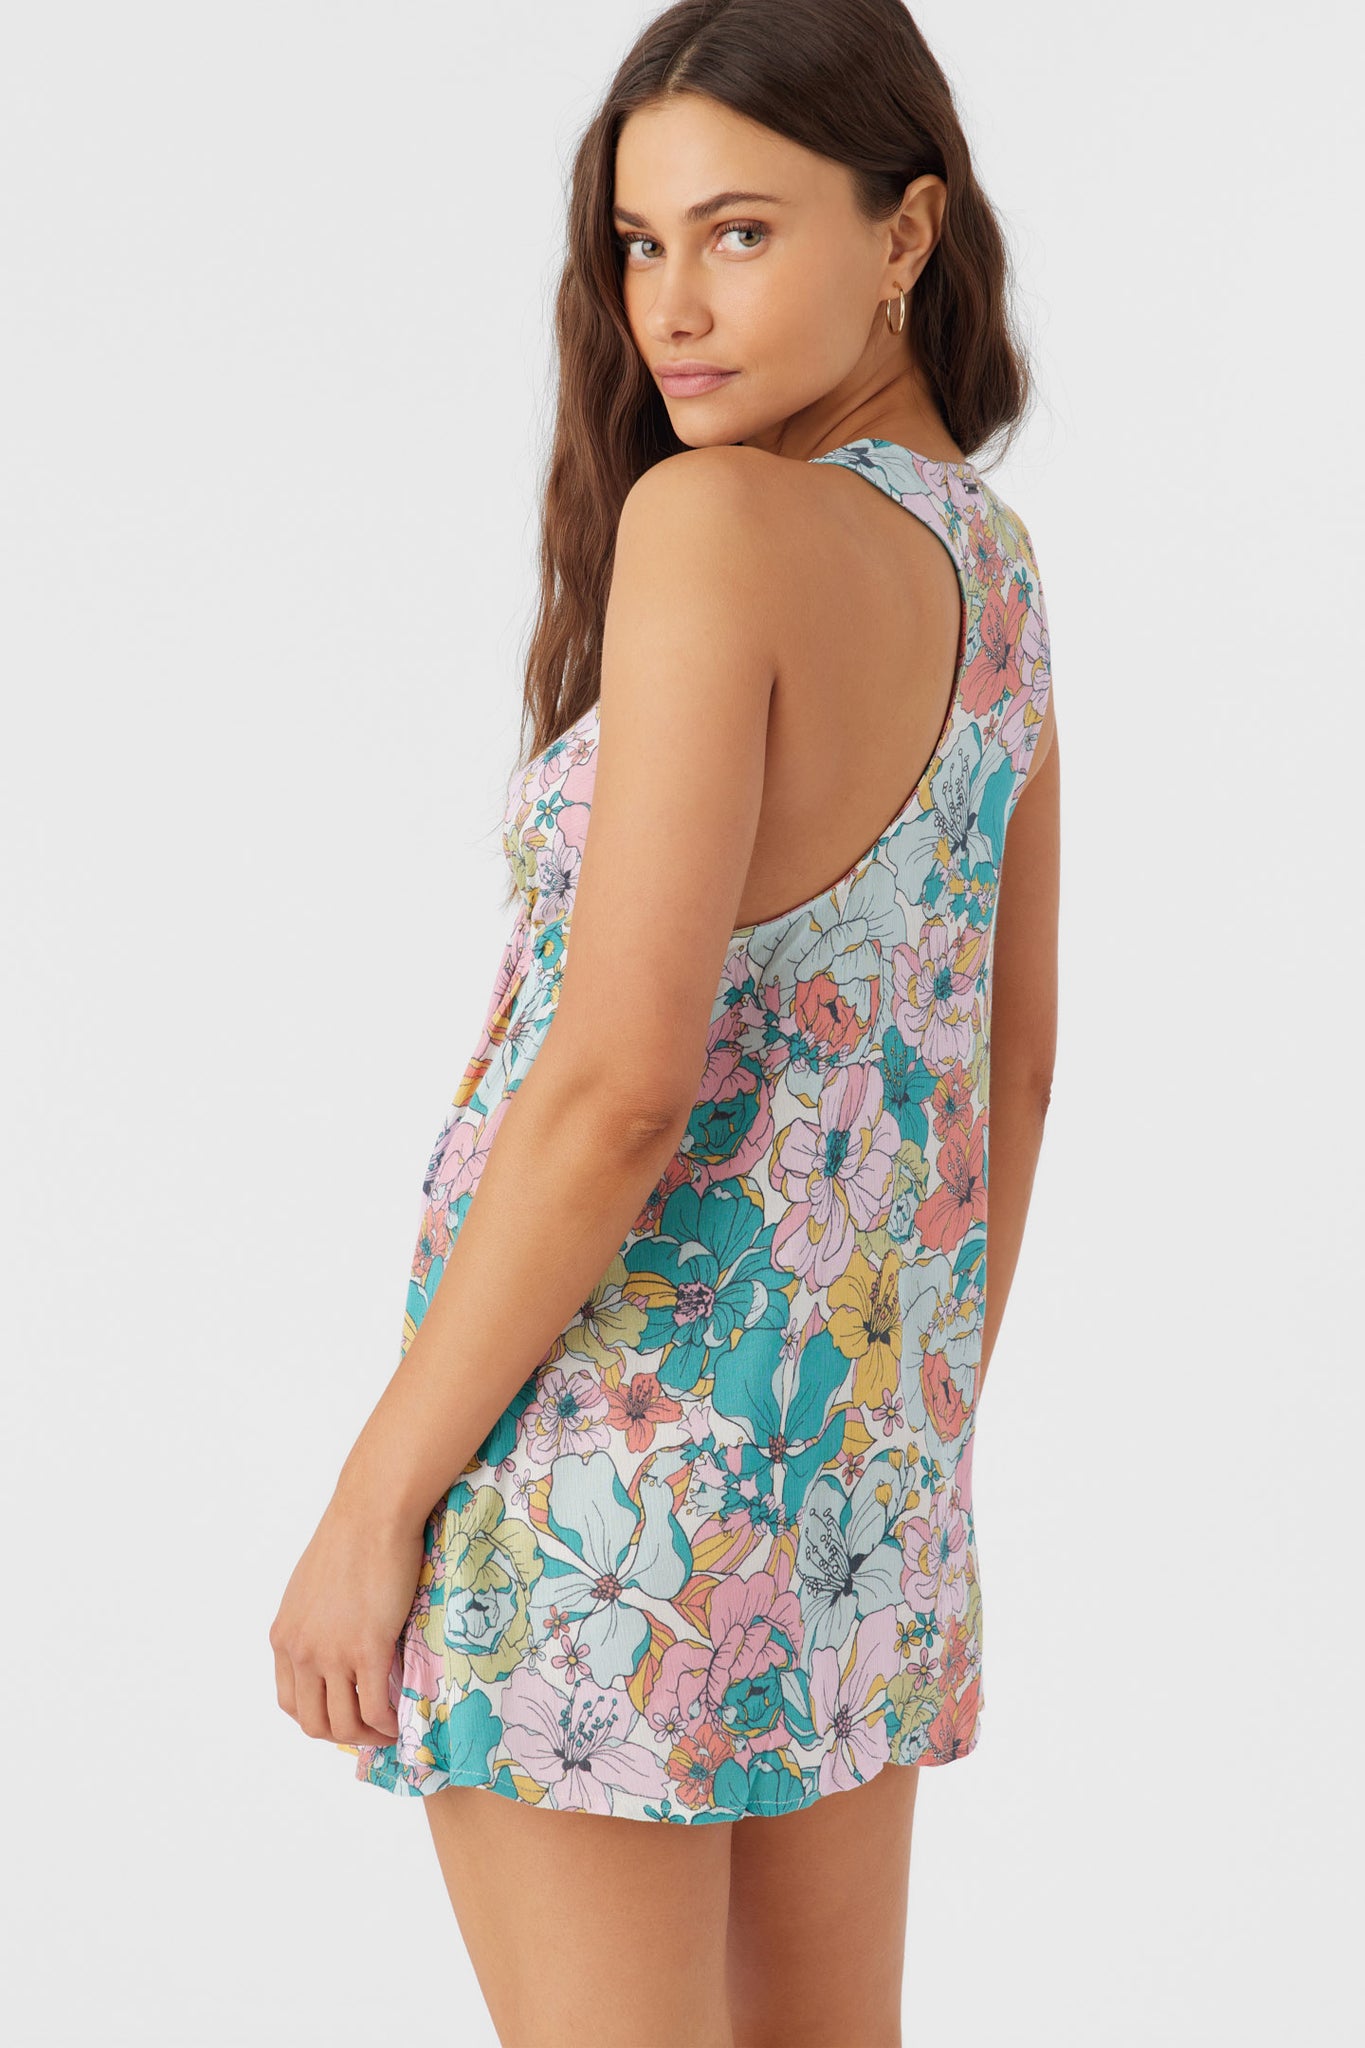 SARAH JANIS FLORAL COVER-UP TUNIC